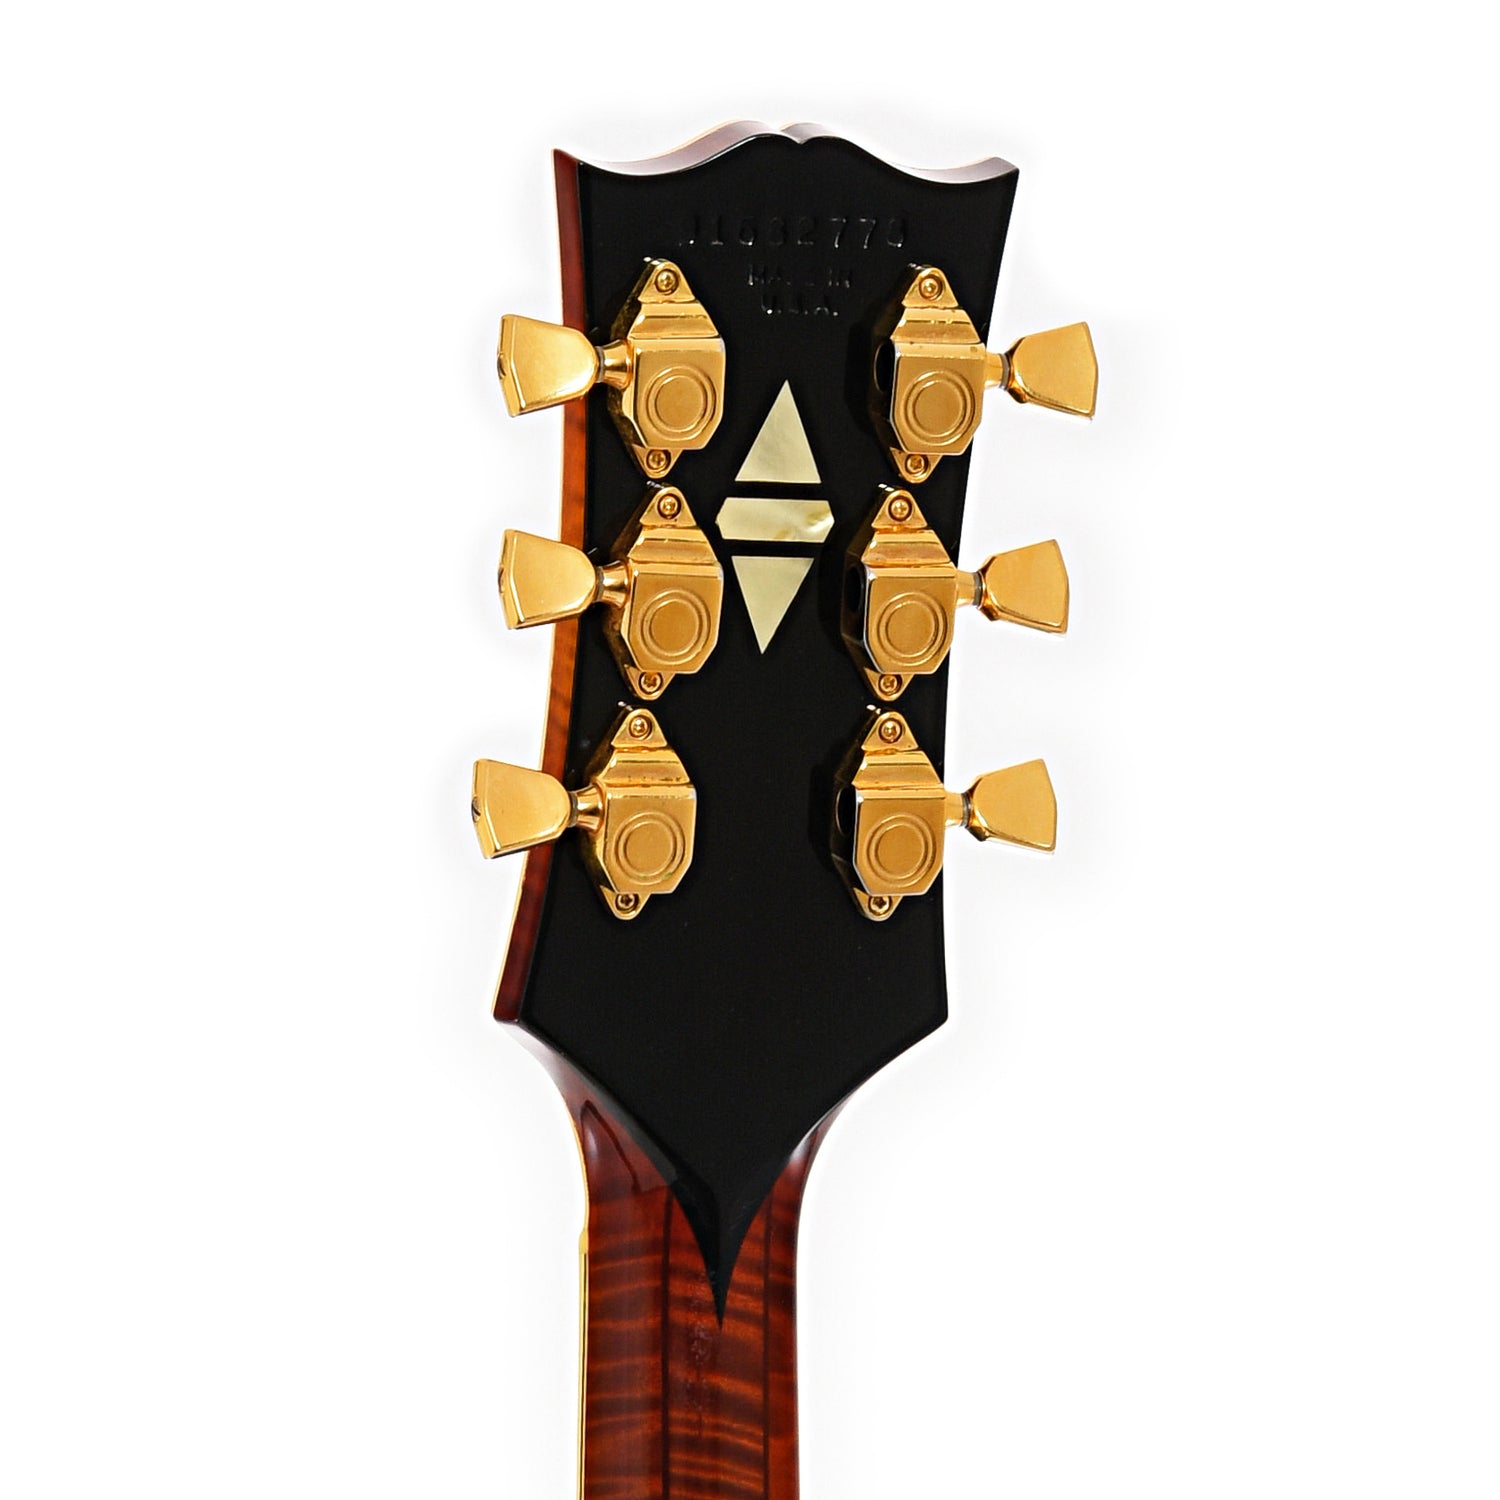 Back headstock of Gibson Super 400 CES Hollow Body Electric